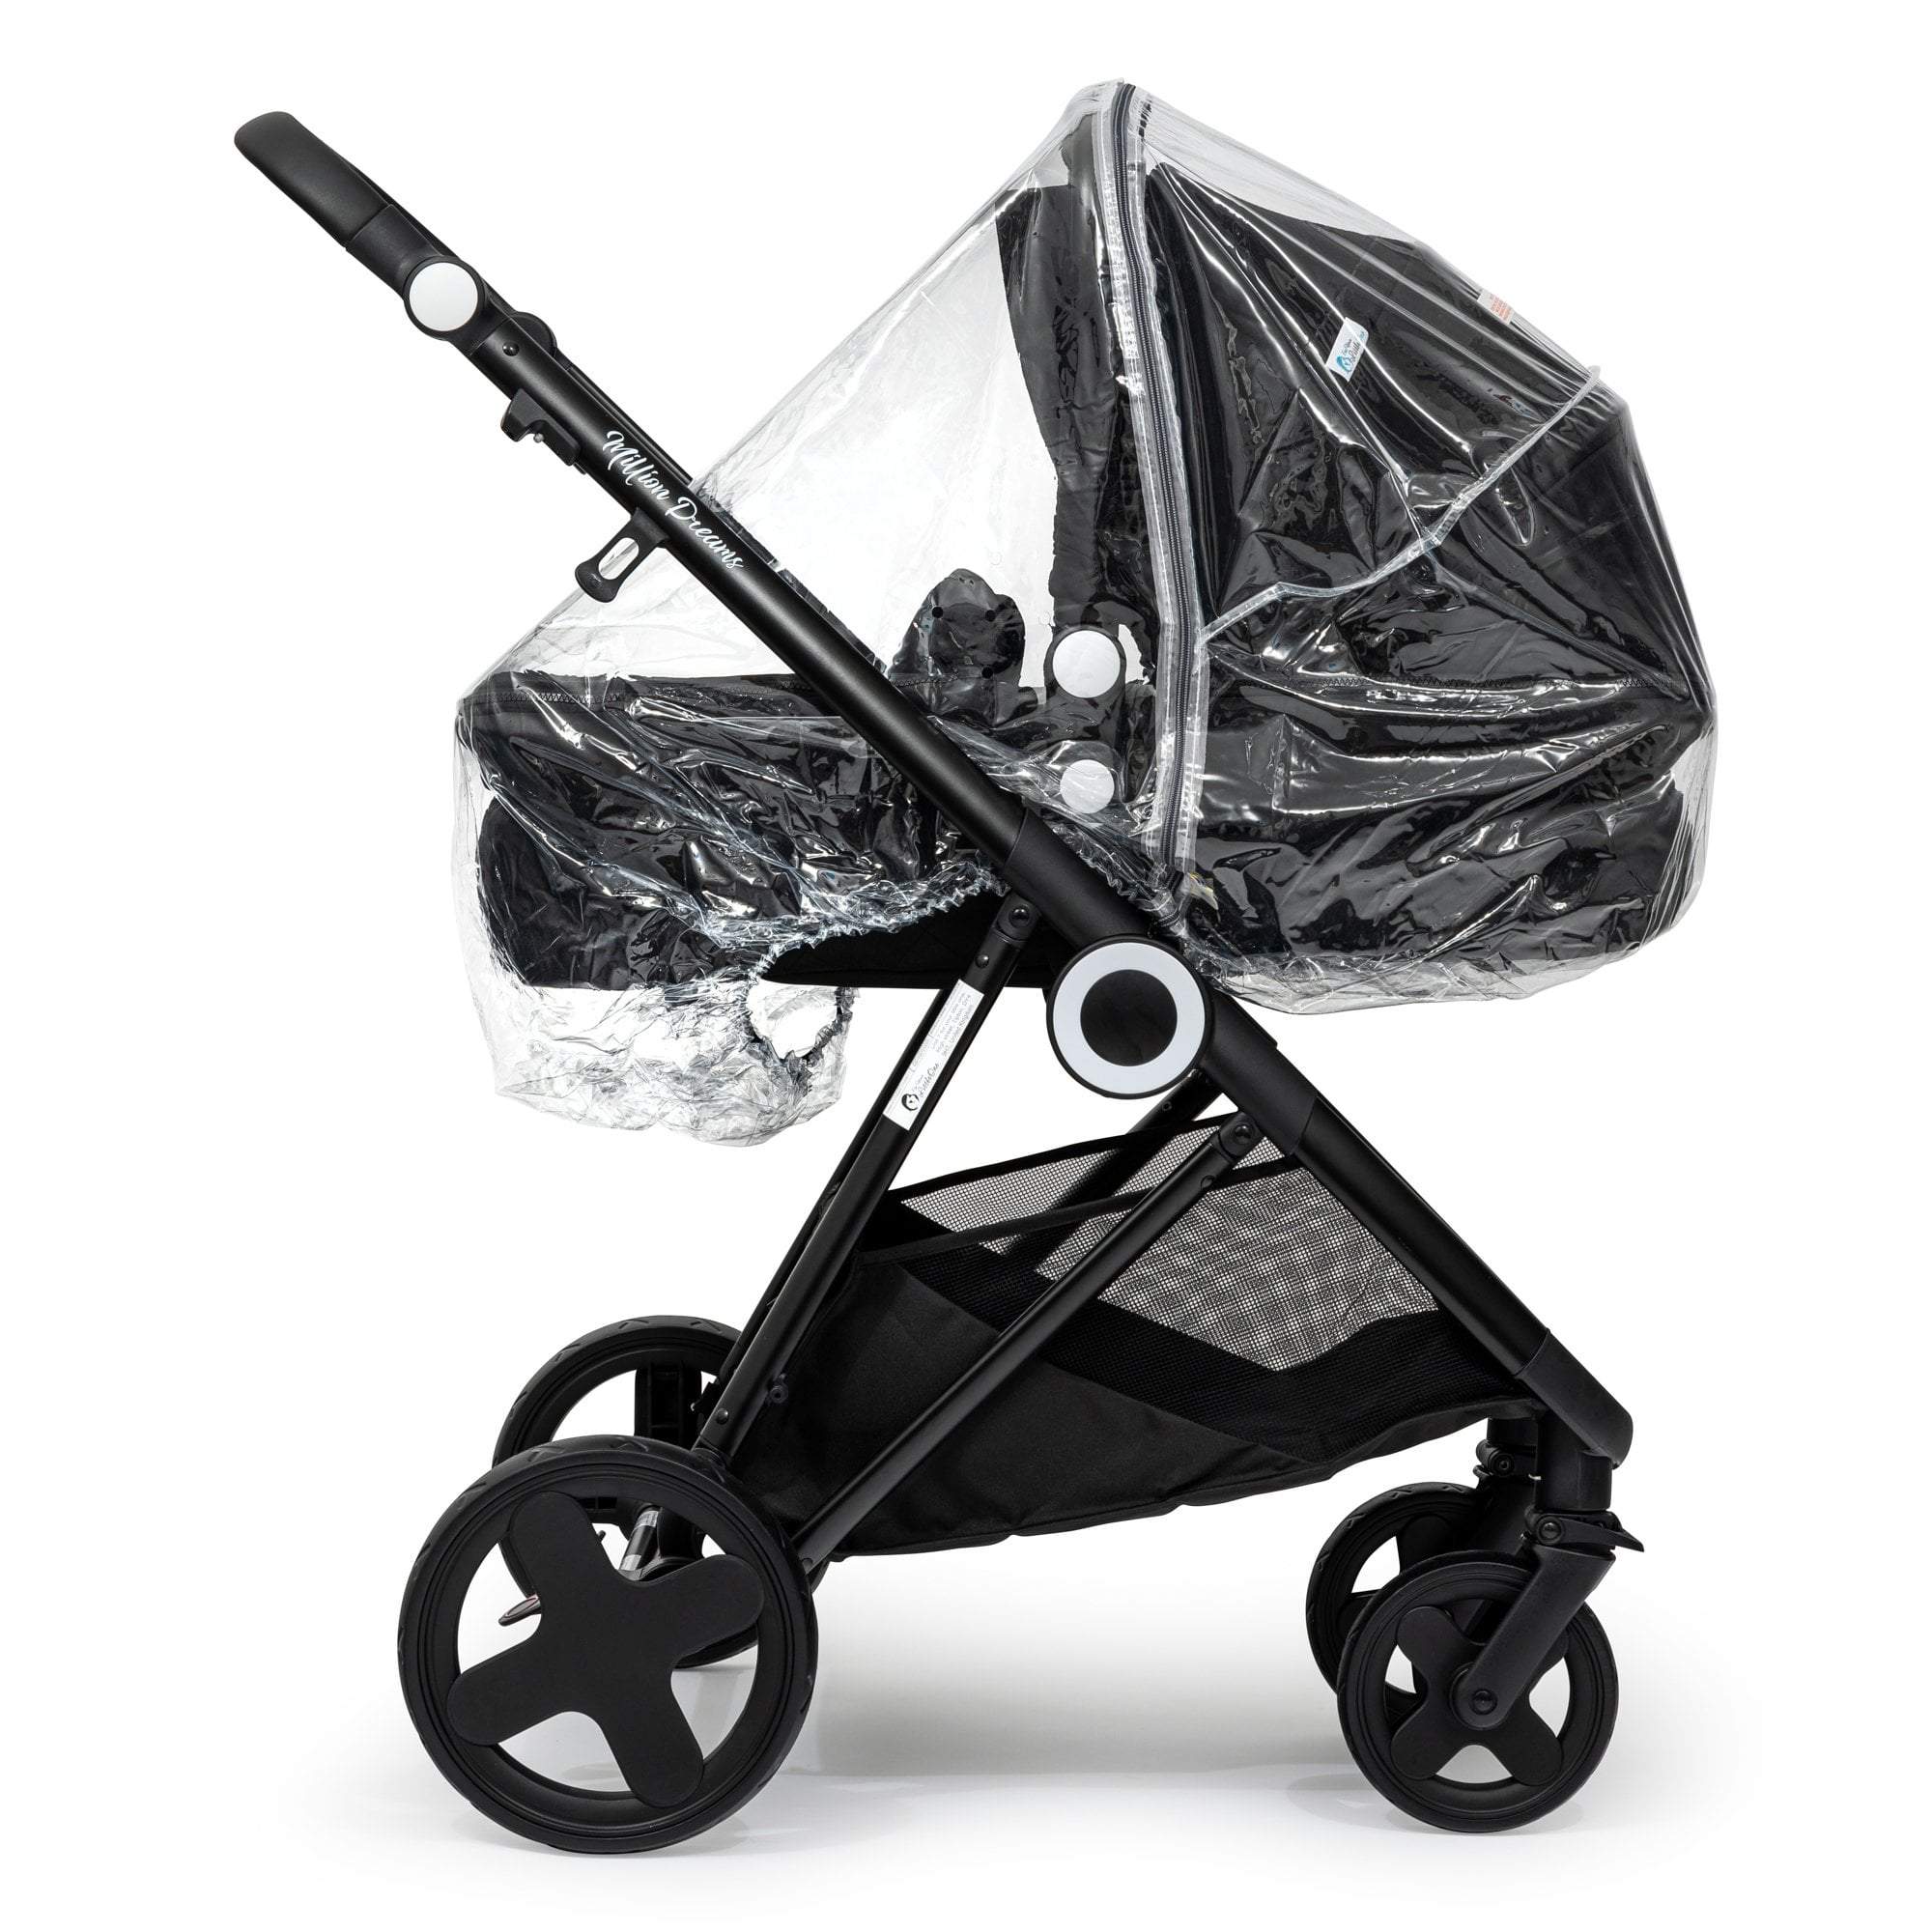 Carrycot Raincover Compatible With Brevi - Fits All Models - For Your Little One